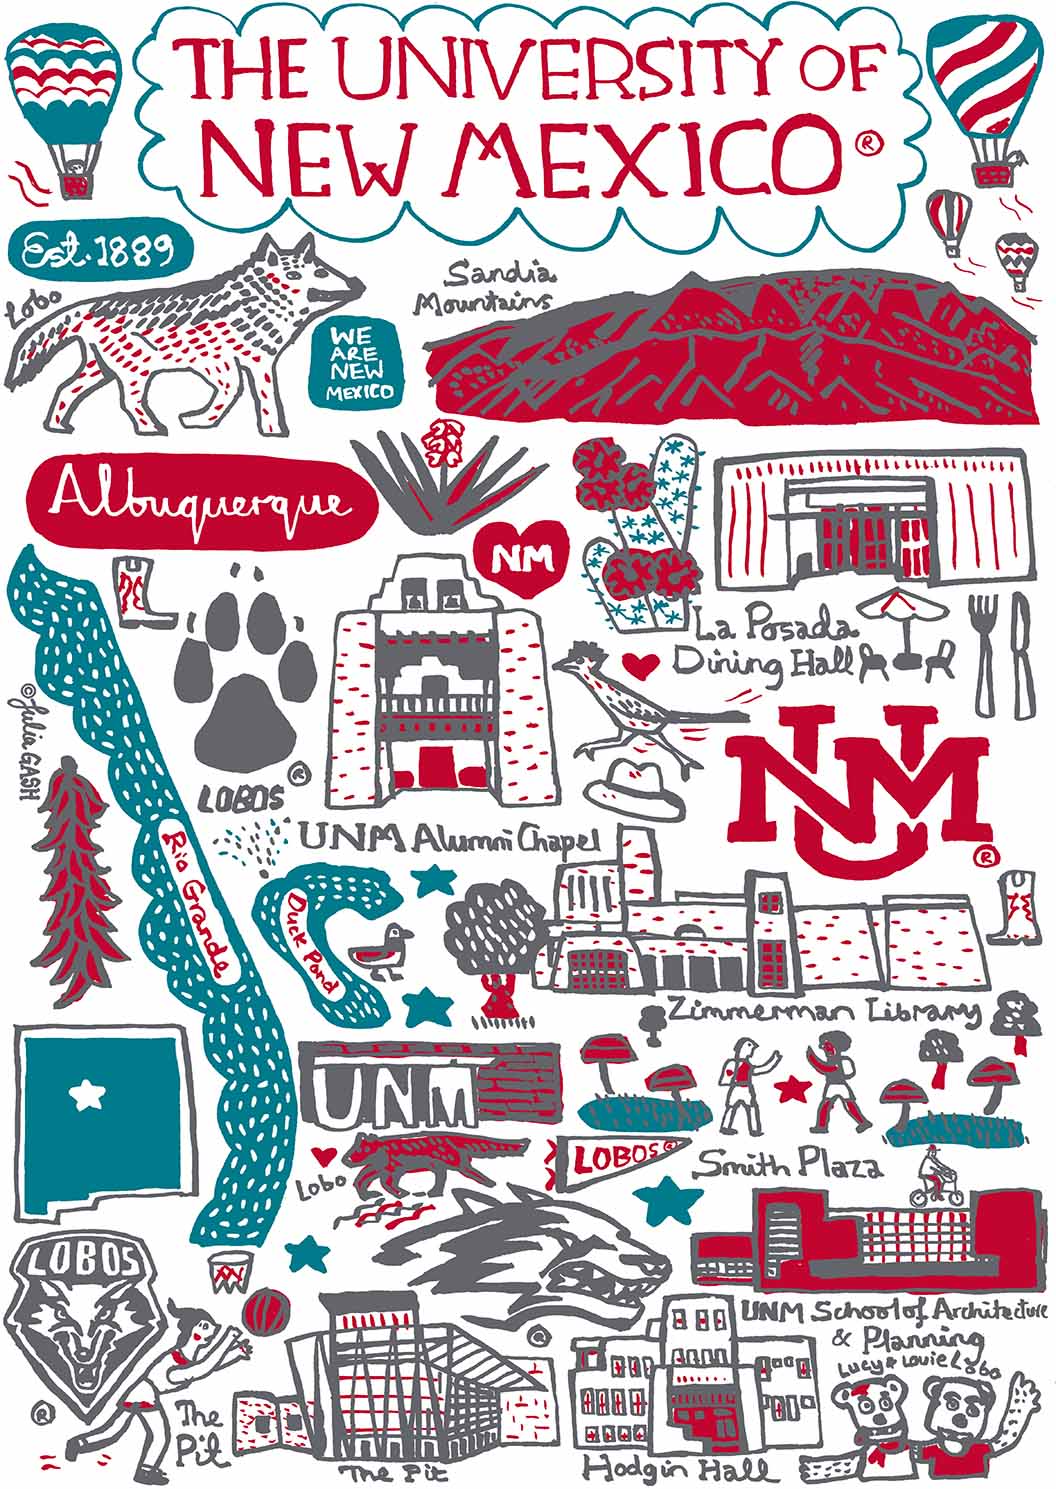 University of New Mexico Design by Julia Gash